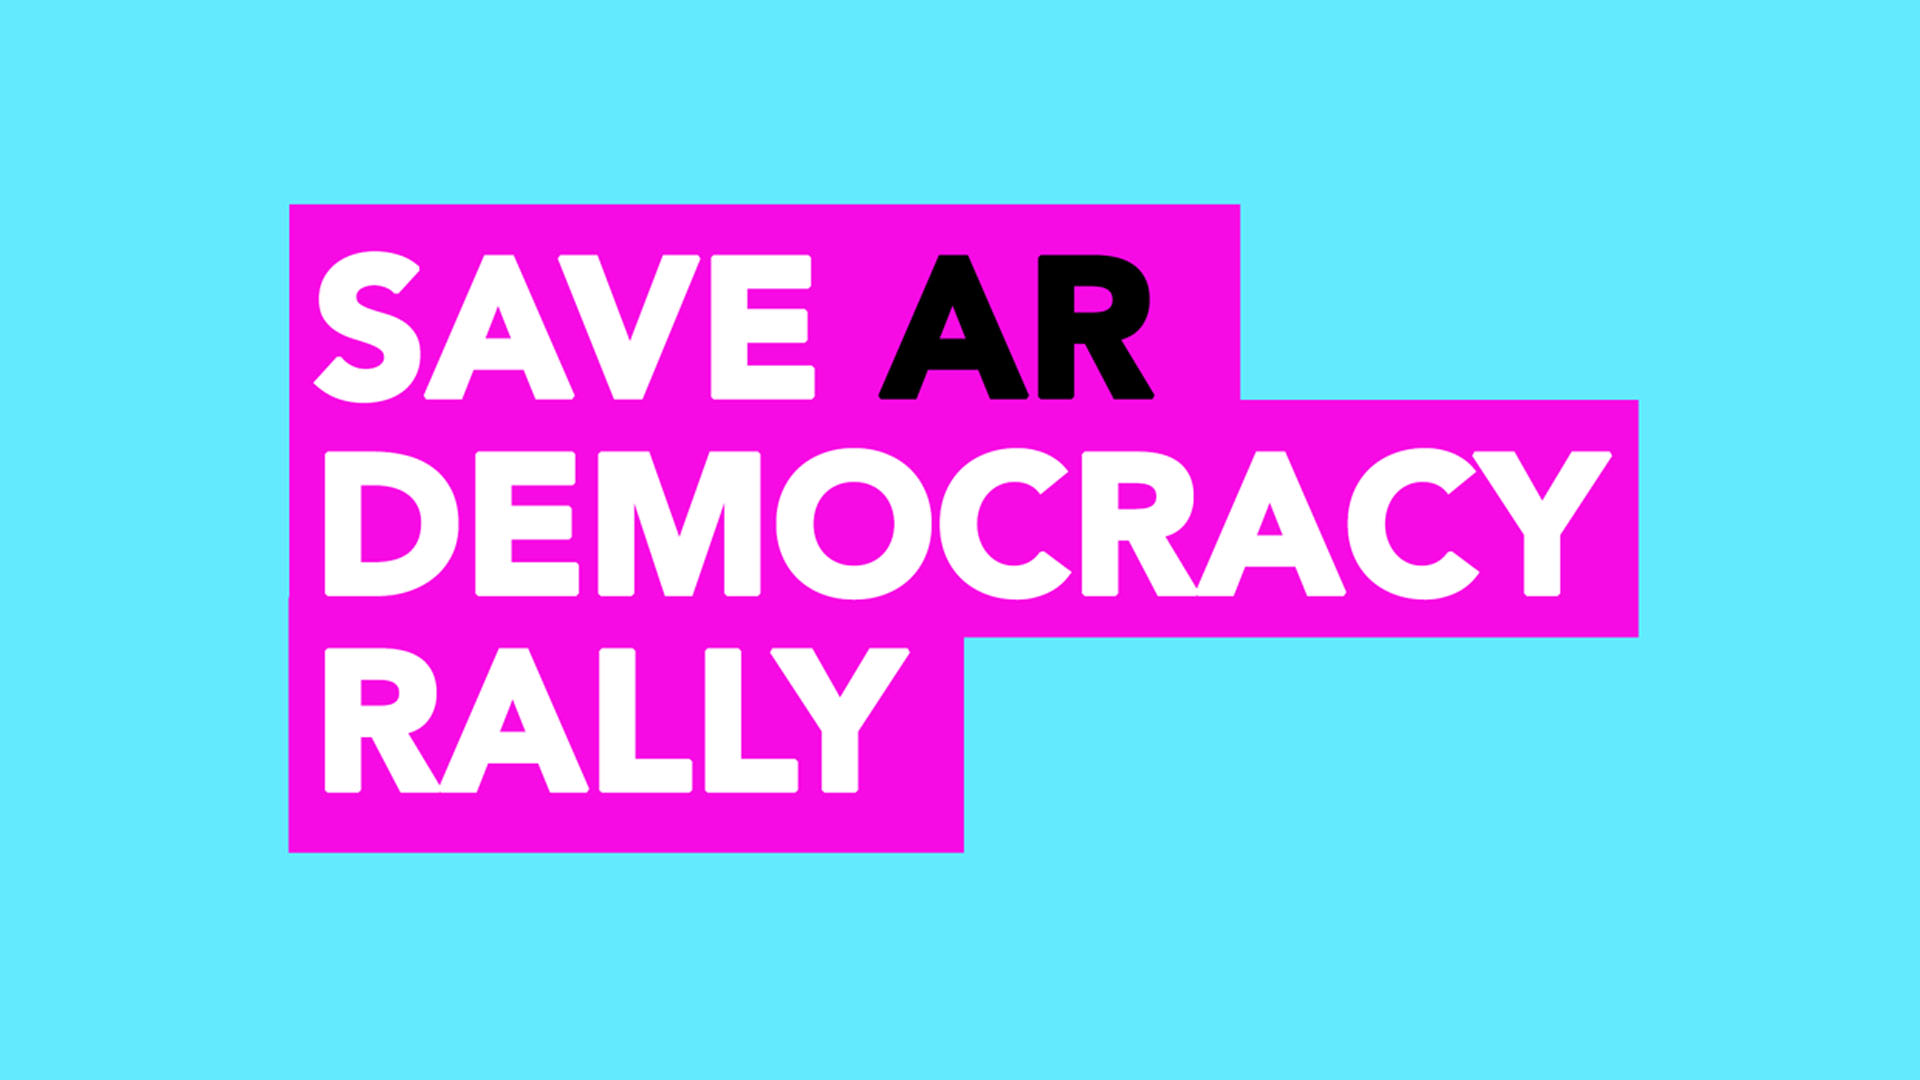 Stand Up for Voter Rights and Save AR Democracy!